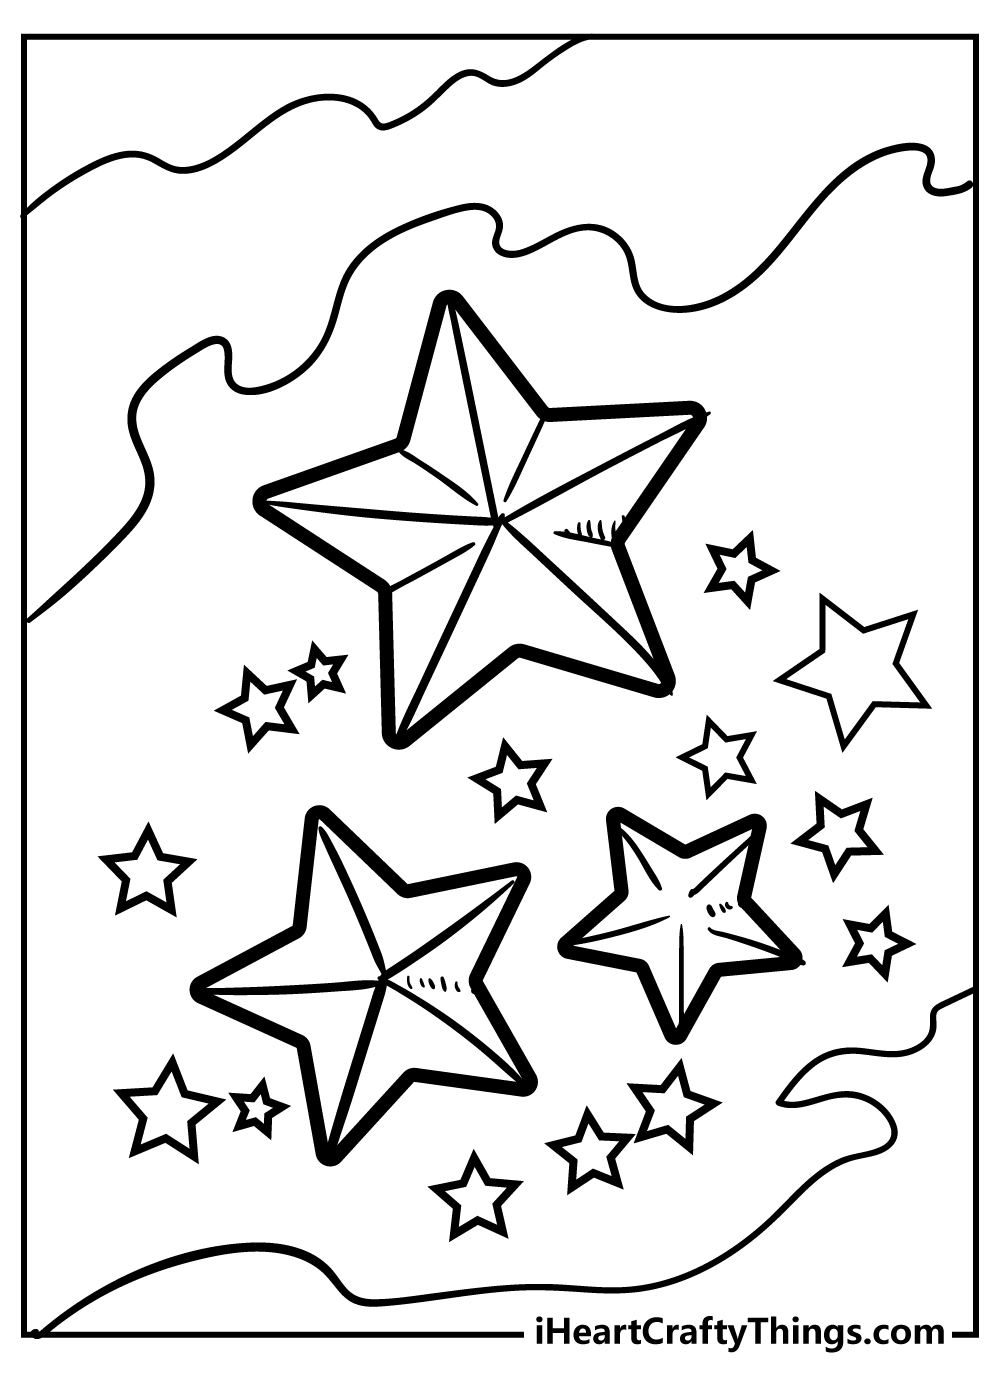 Star coloring pages free printables